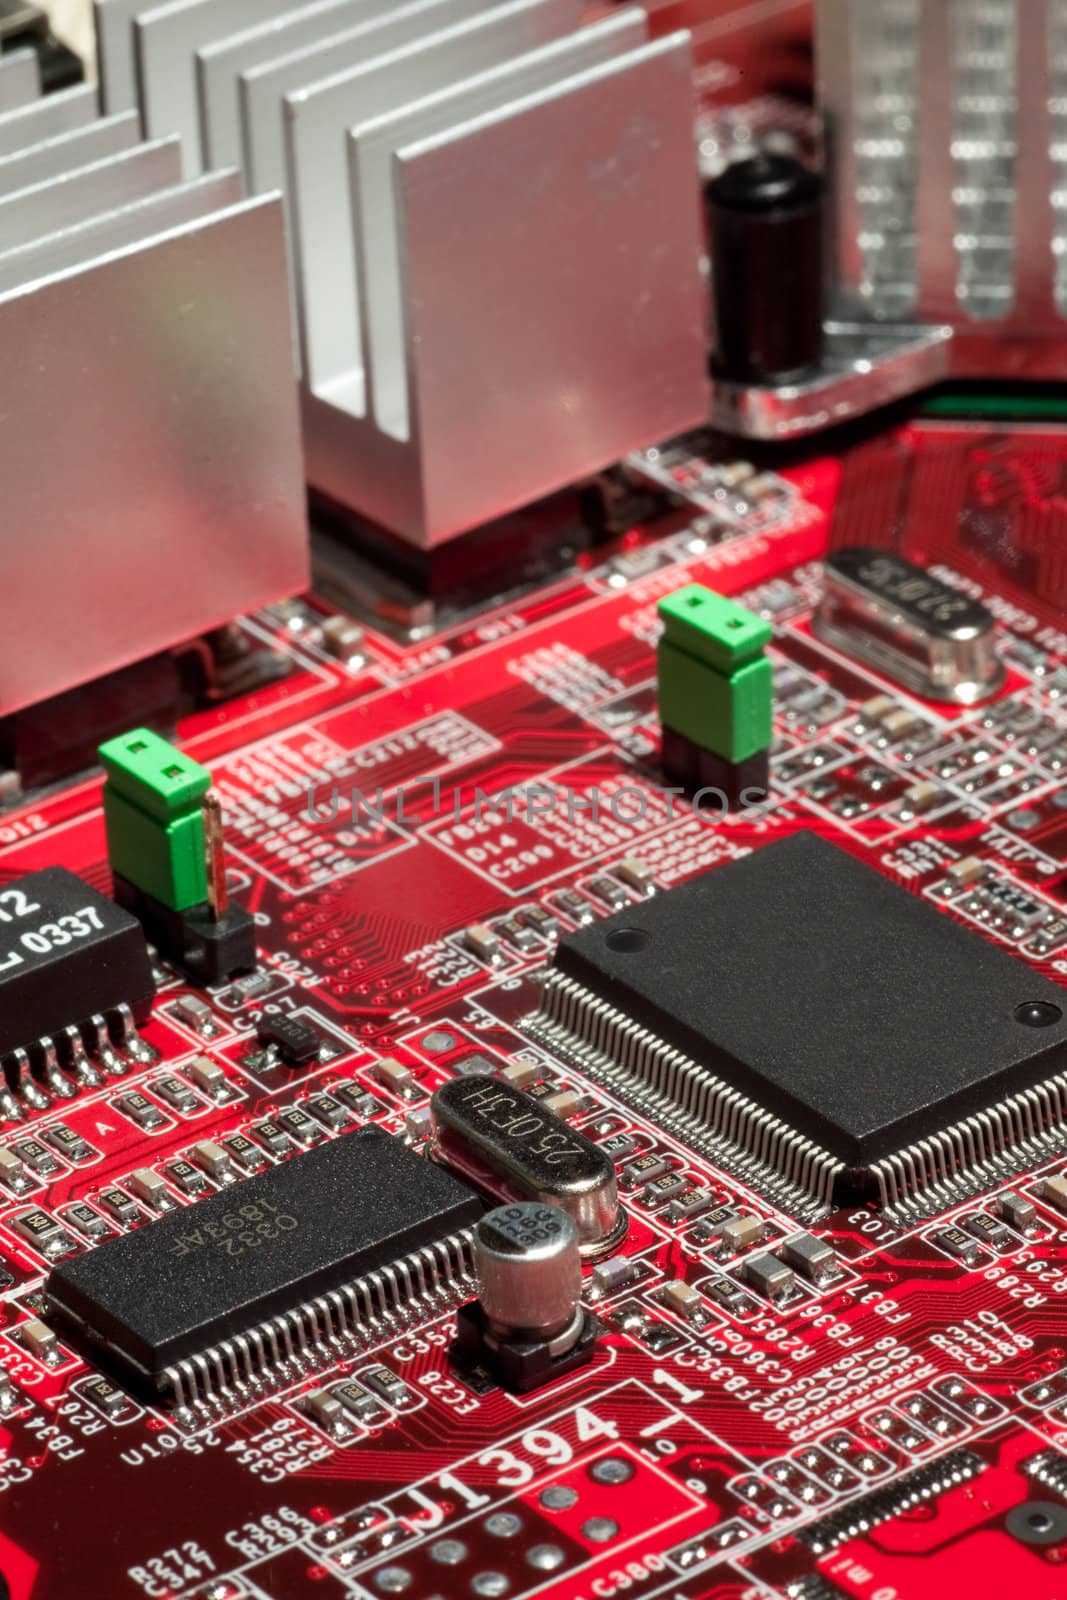 Red circuit board with electronic components such as microchips, condensors, resistors, and transistors.